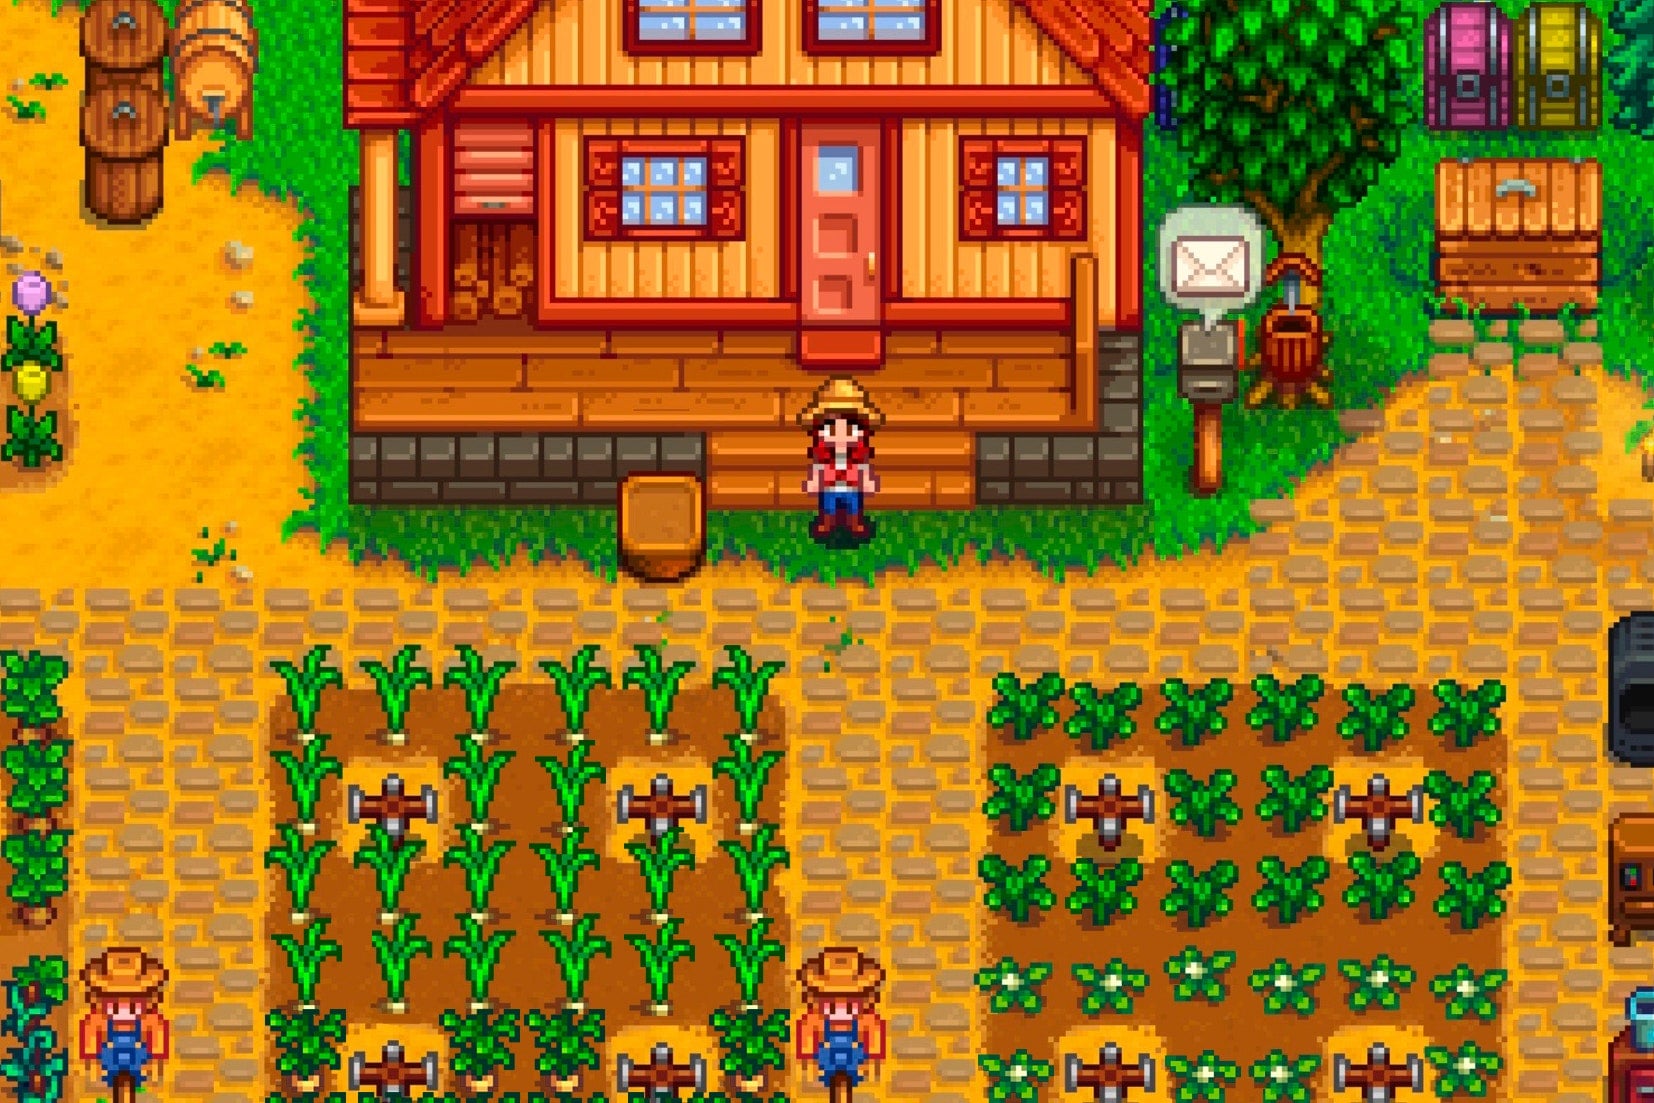 20 Games Like Stardew Valley You Should Play in 2022. 